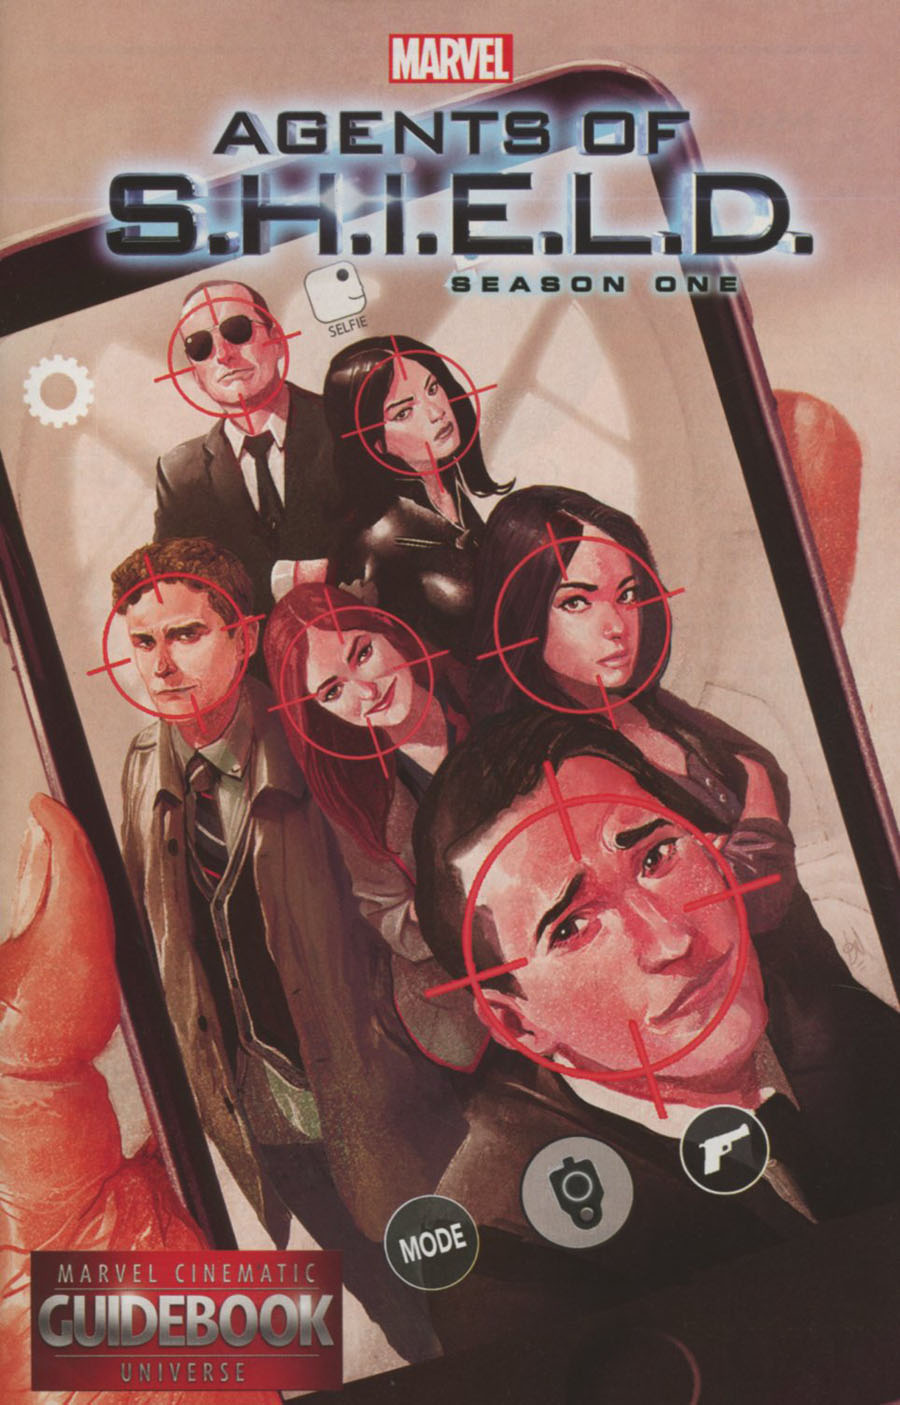 Guidebook To The Marvel Cinematic Universe Marvels Agents Of S.H.I.E.L.D.